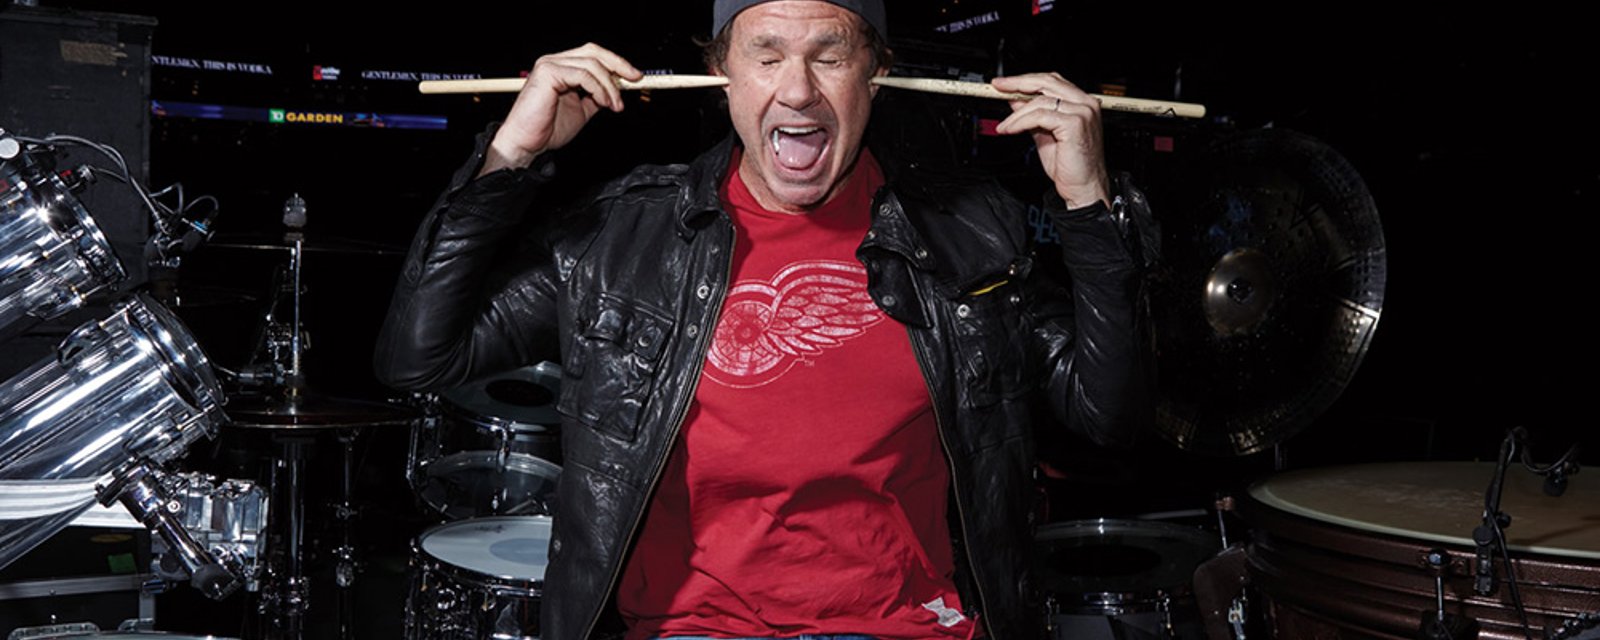 Red Hot Chili Peppers drummer Chad Smith is a longtime Detroit Red Wings fan